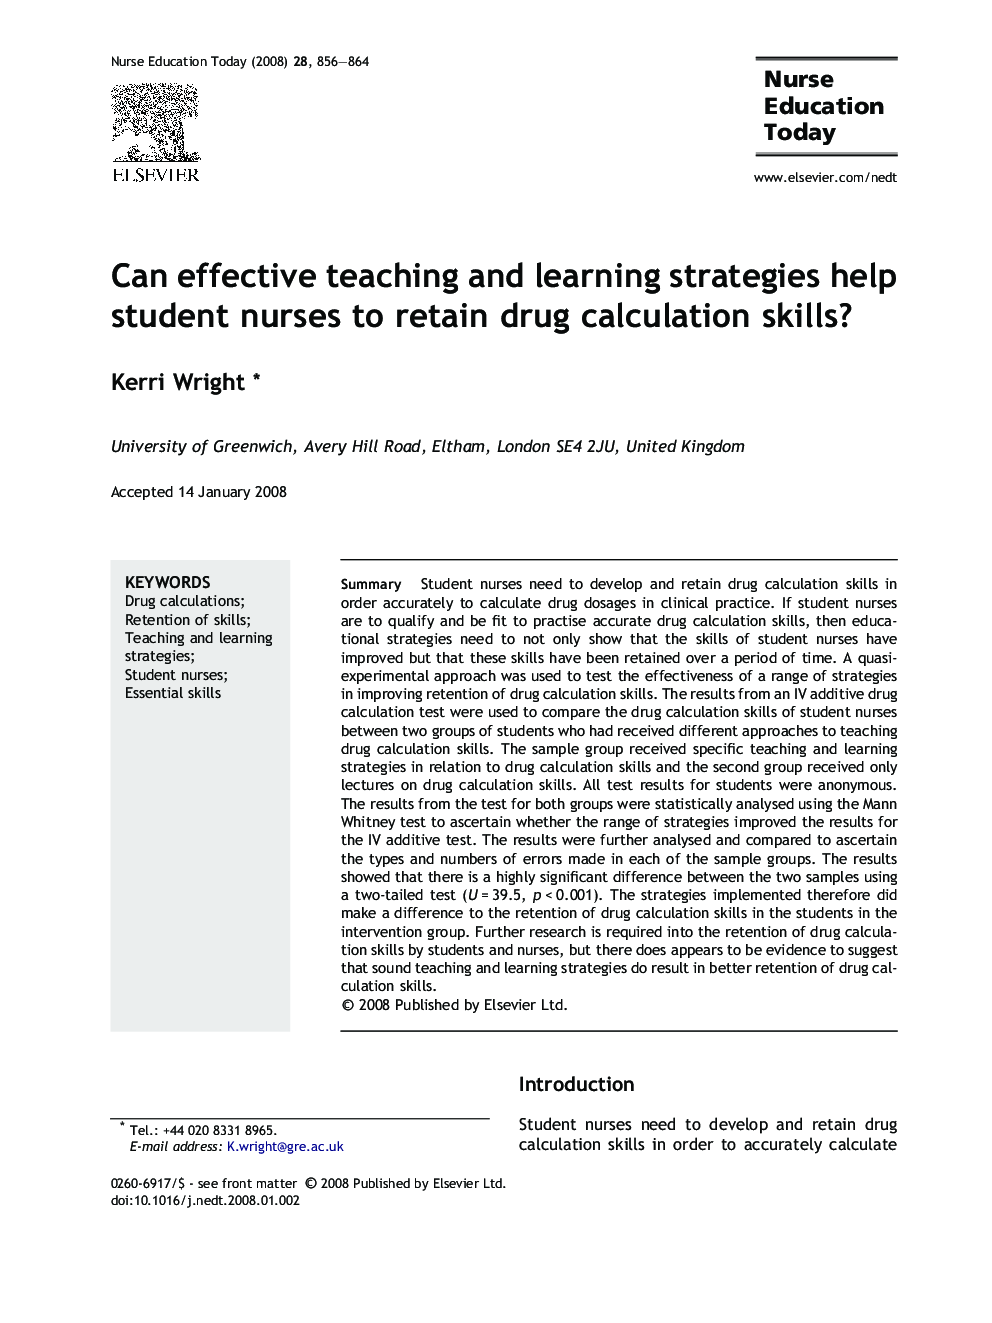 Can effective teaching and learning strategies help student nurses to retain drug calculation skills?